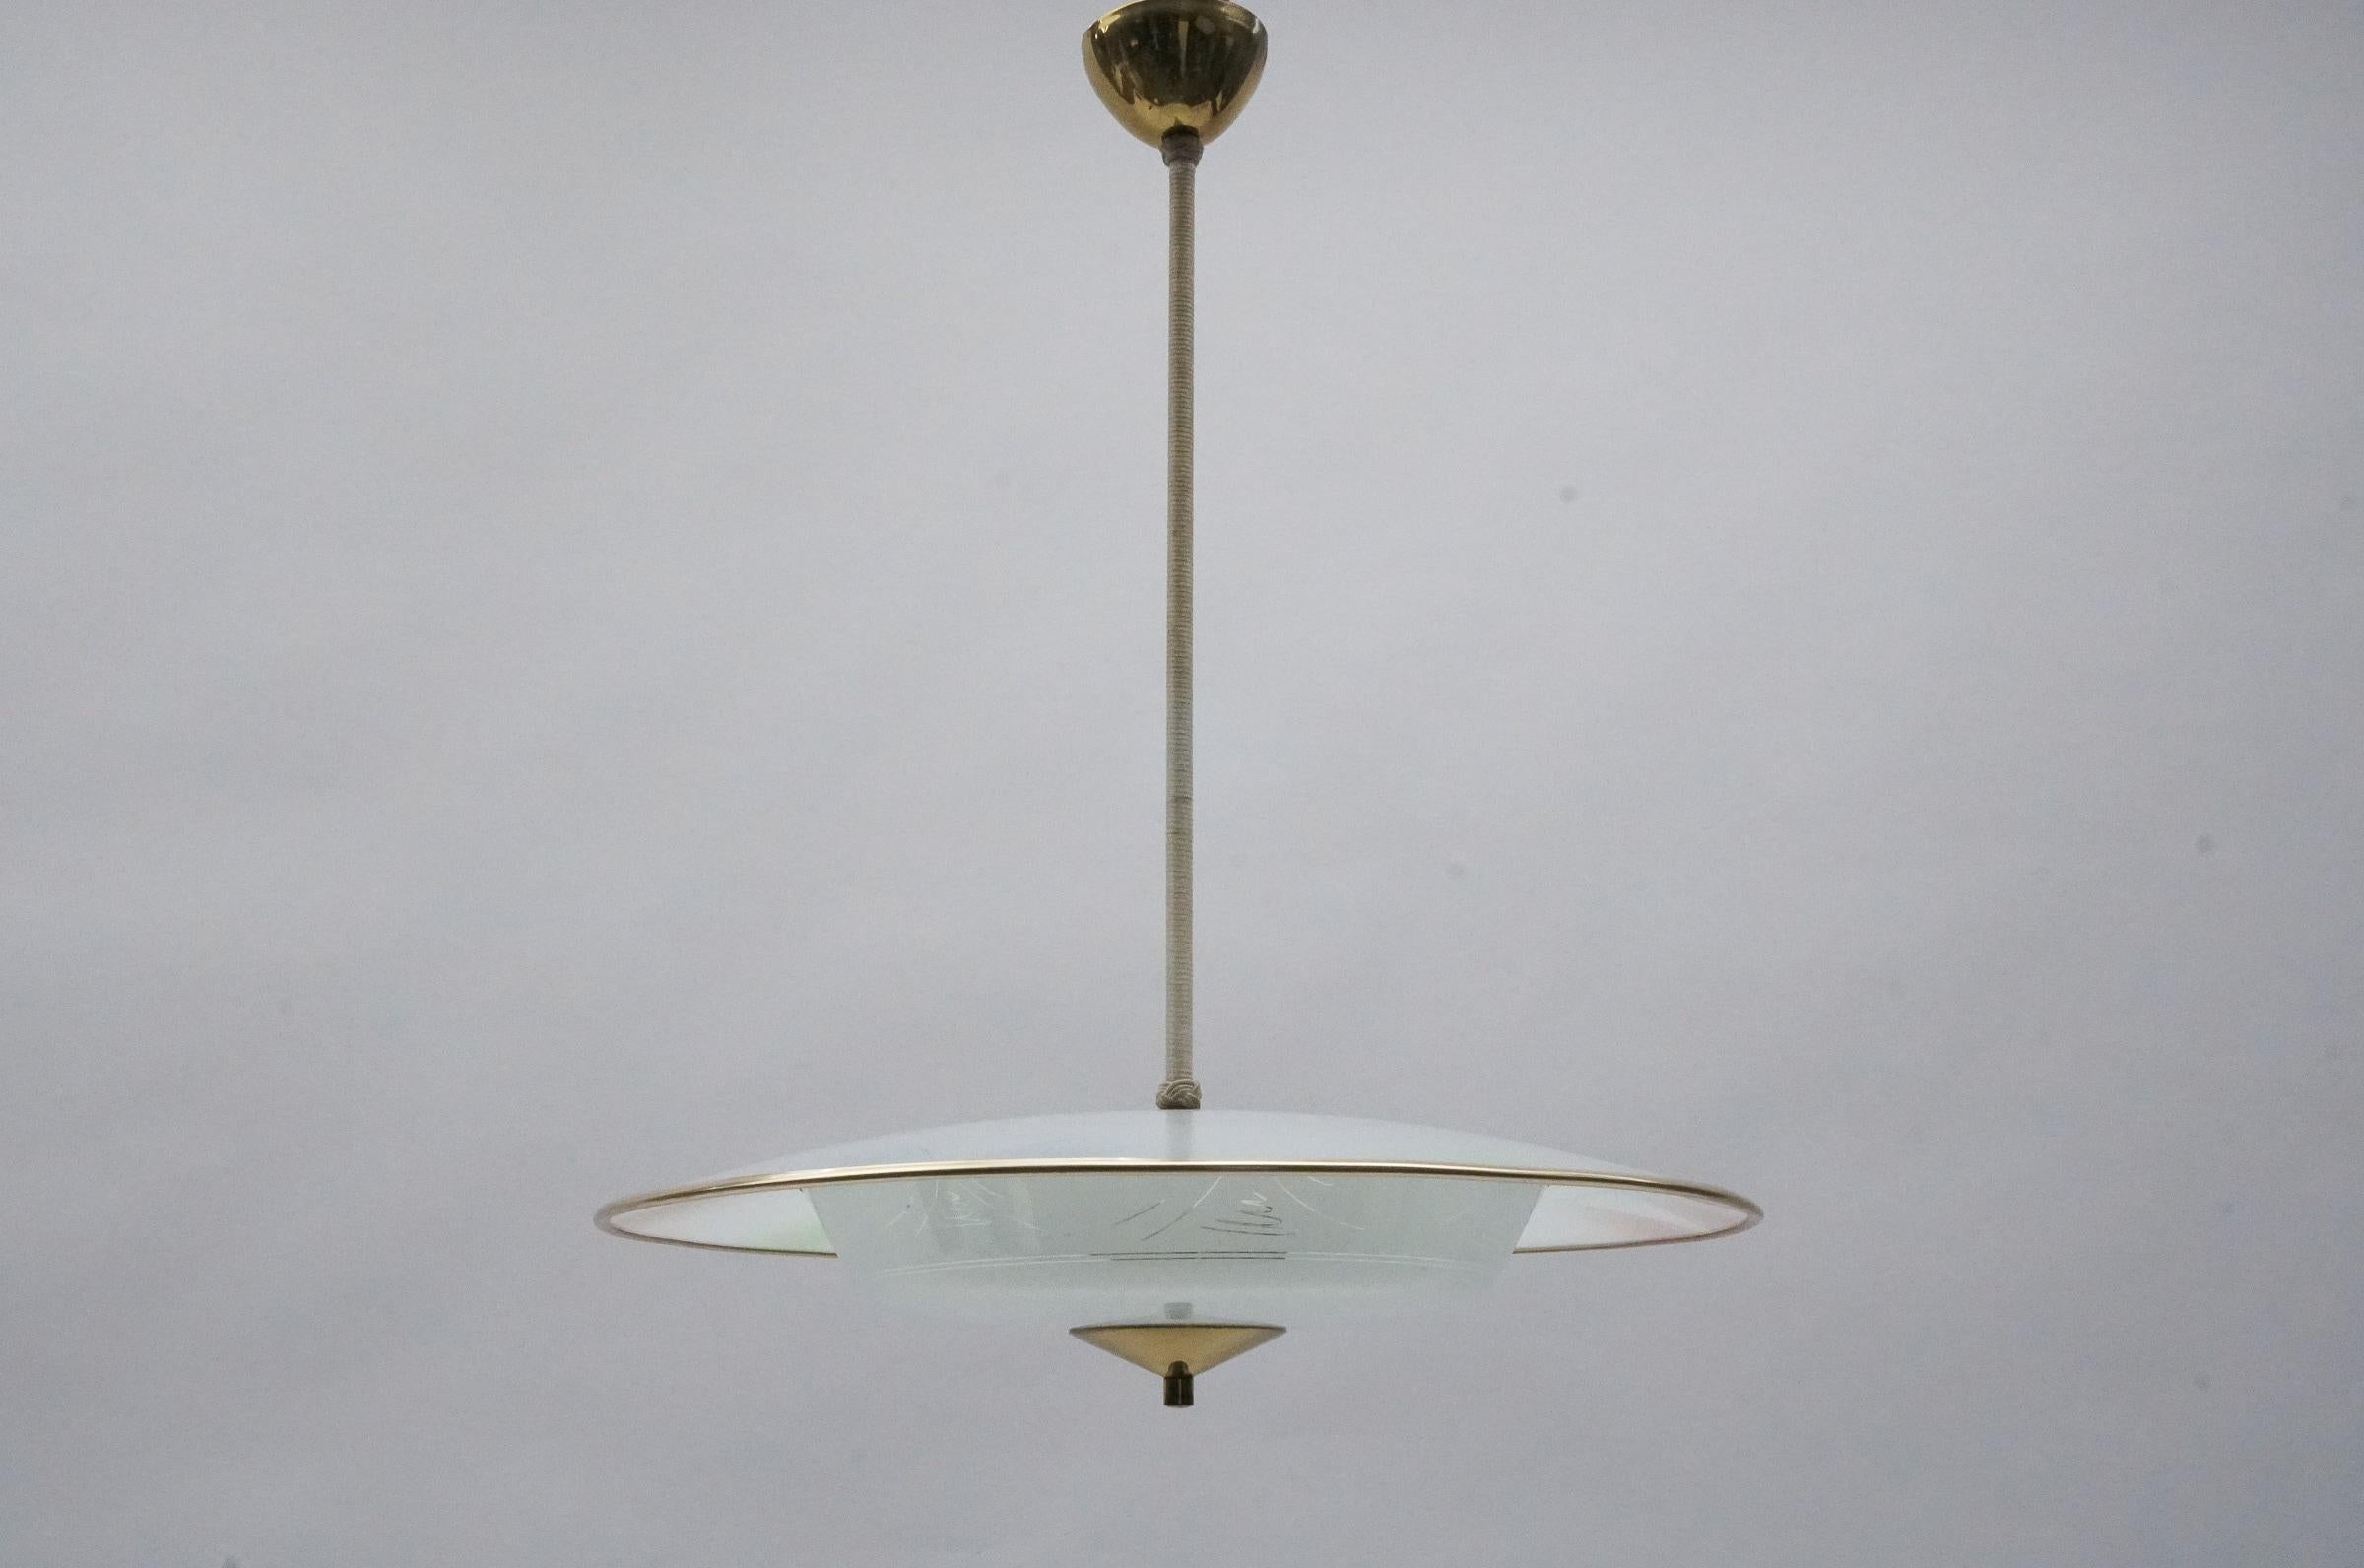 Executed in glass, brass and metal. The lamp needs 2 x E14 / E15 Edison screw fit bulb, is wired, in working condition and runs both on 110 / 230 volt.

Our lamps are checked, cleaned and are suitable for use in the USA.